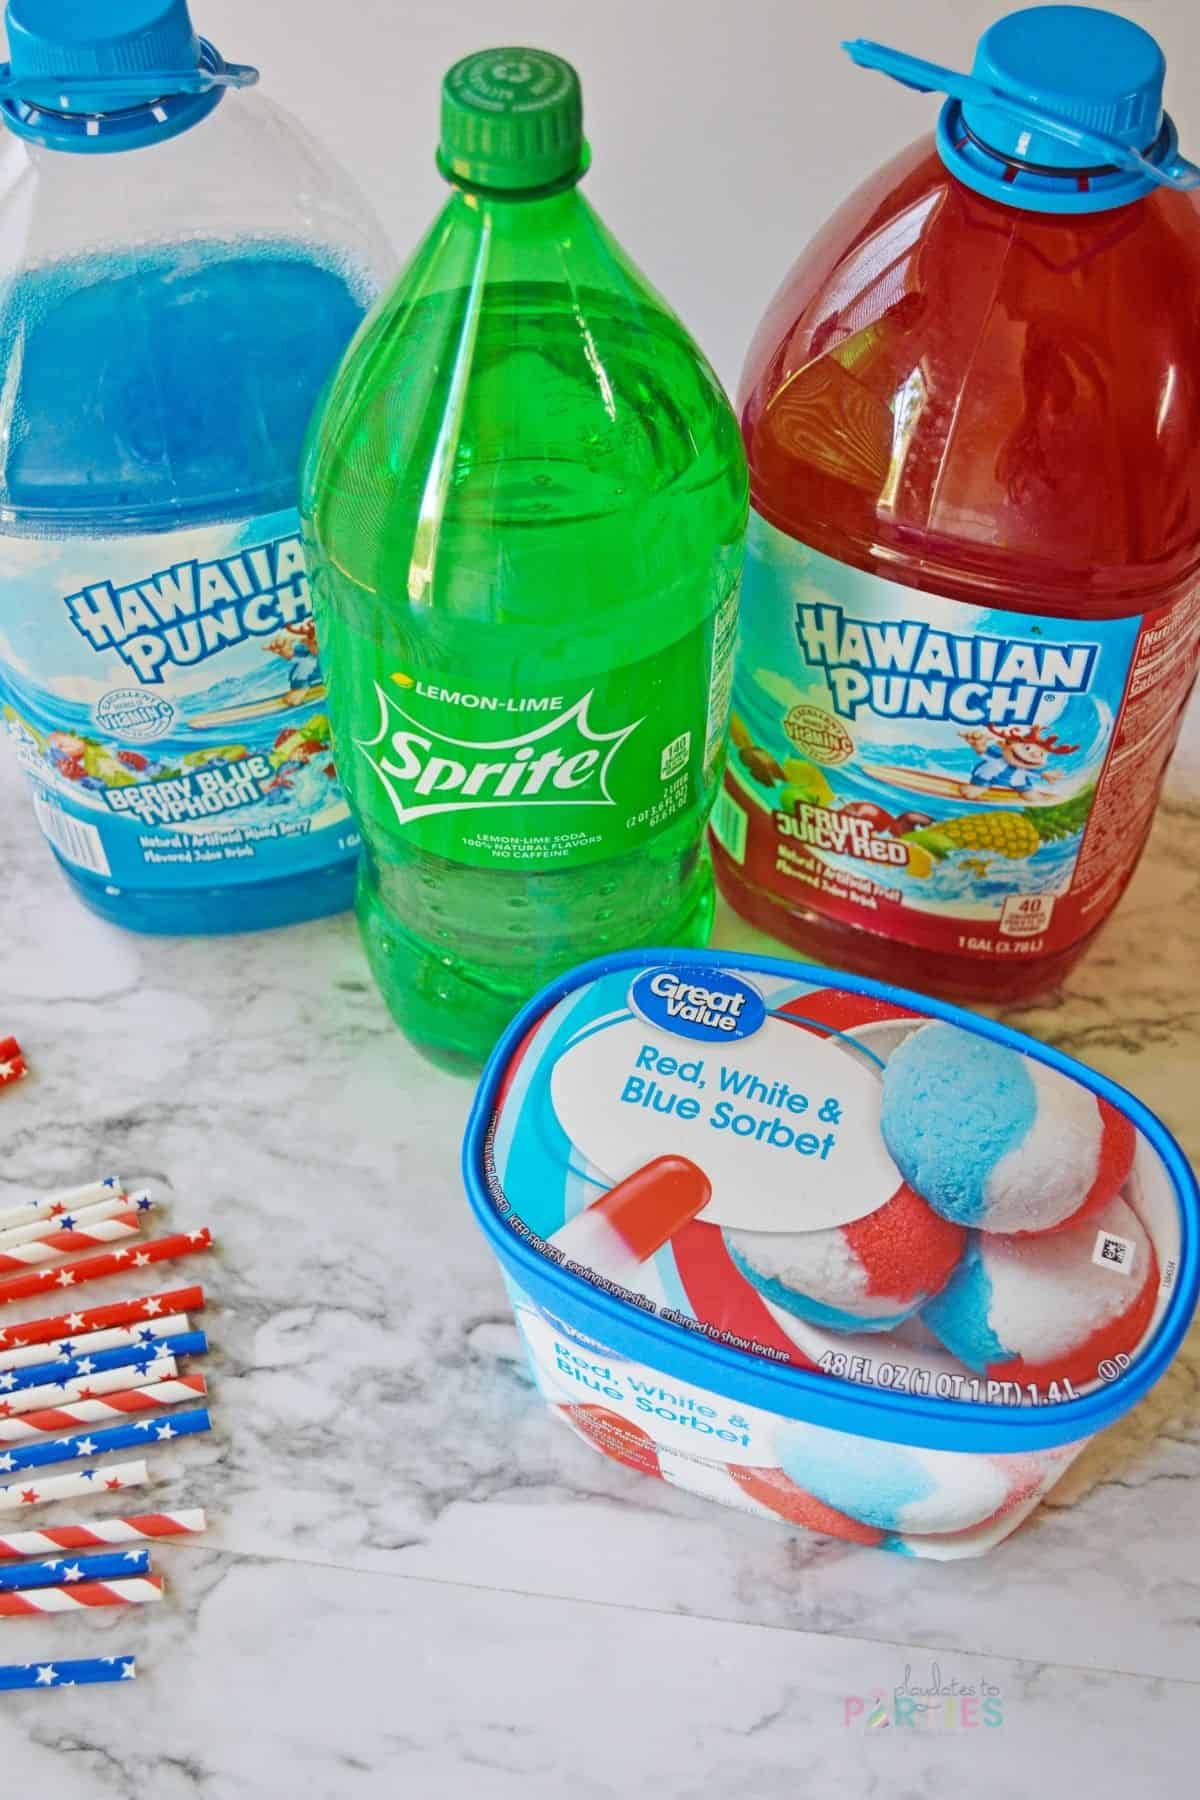 Ingredients for red white and blue punch.